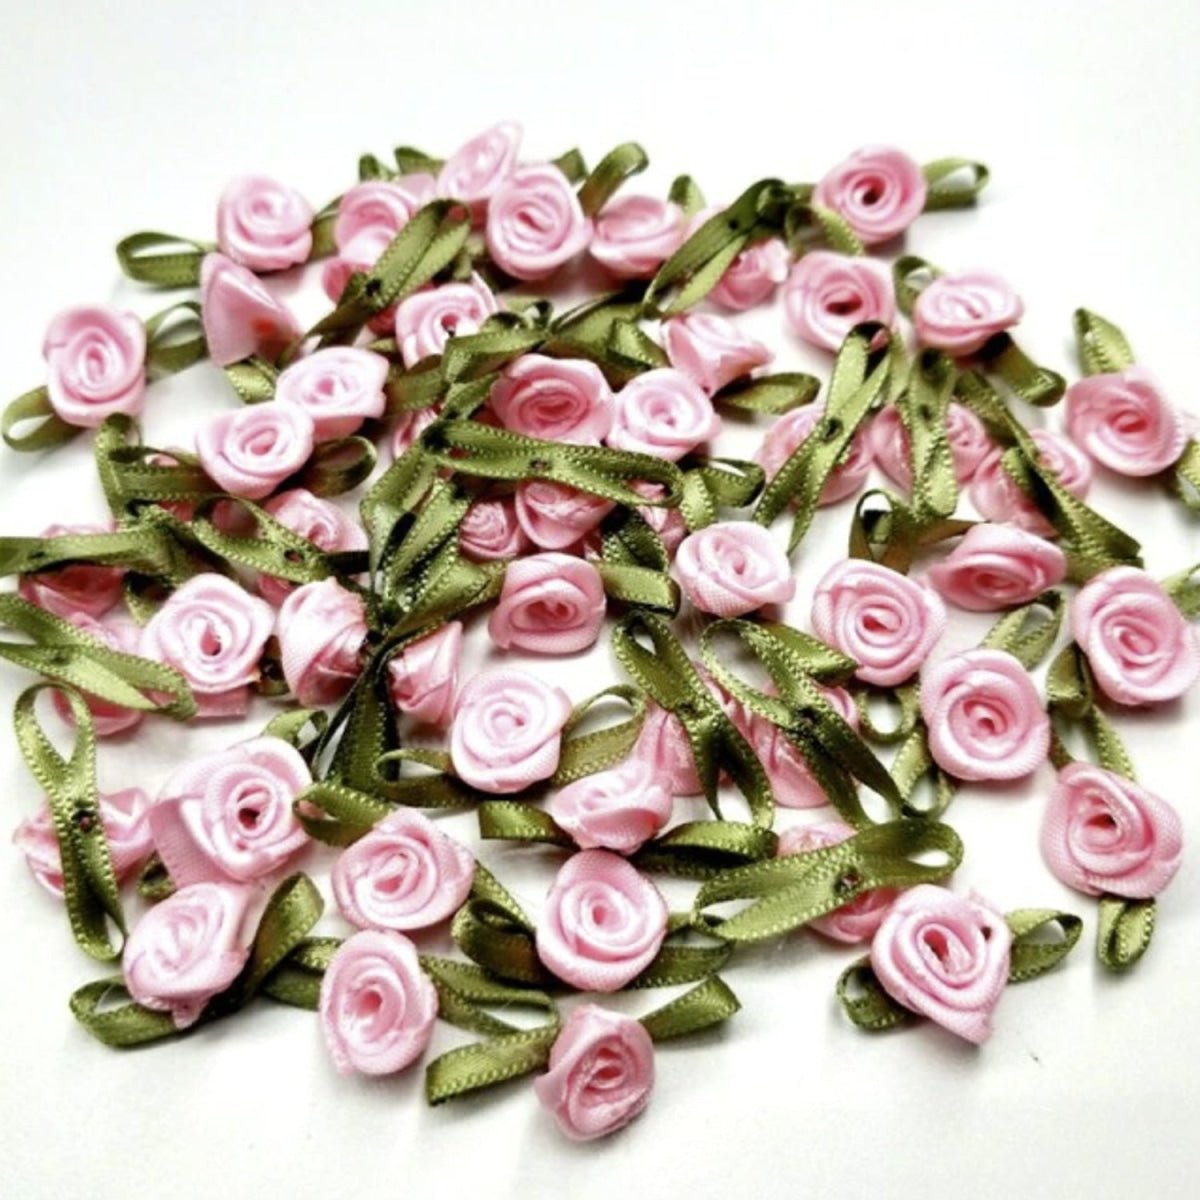 40pcs Mini Artificial Flowers Heads Small Ribbon Roses DIY Crafts Wedding Decorations - Pink - - Asia Sell